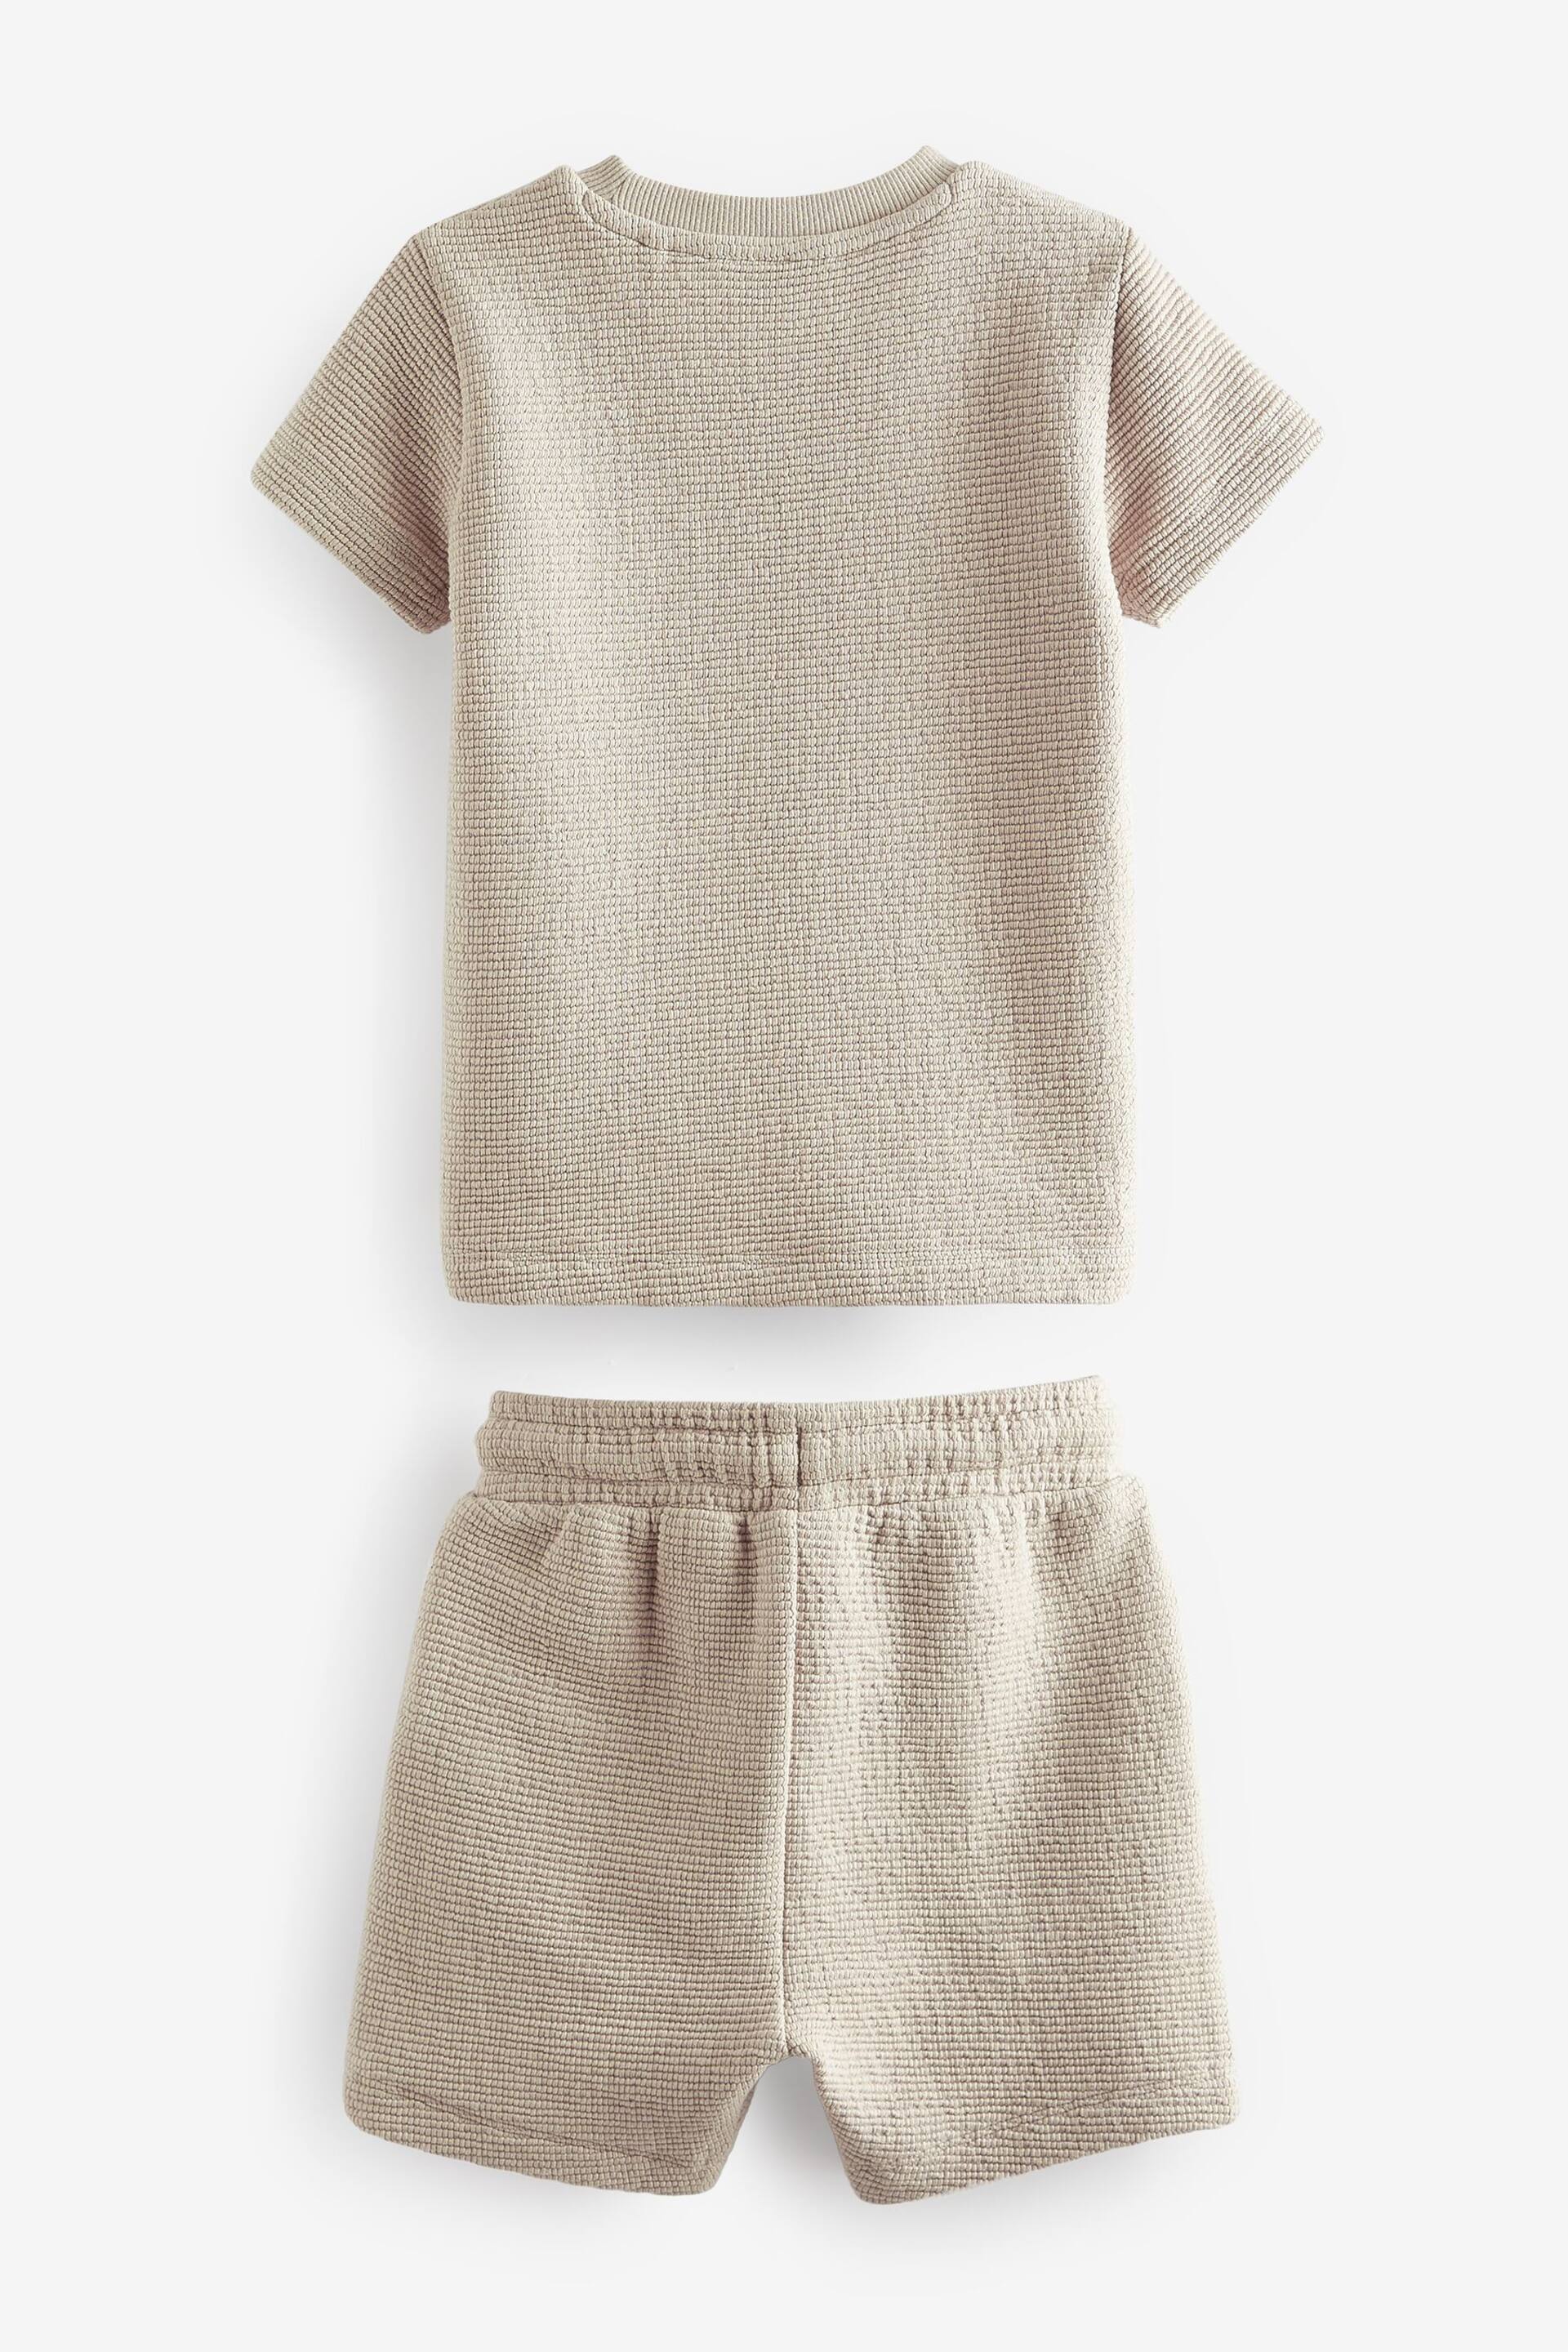 Neutral Textured Jersey Pocket T-Shirt and Shorts Set (3mths-7yrs) - Image 7 of 8